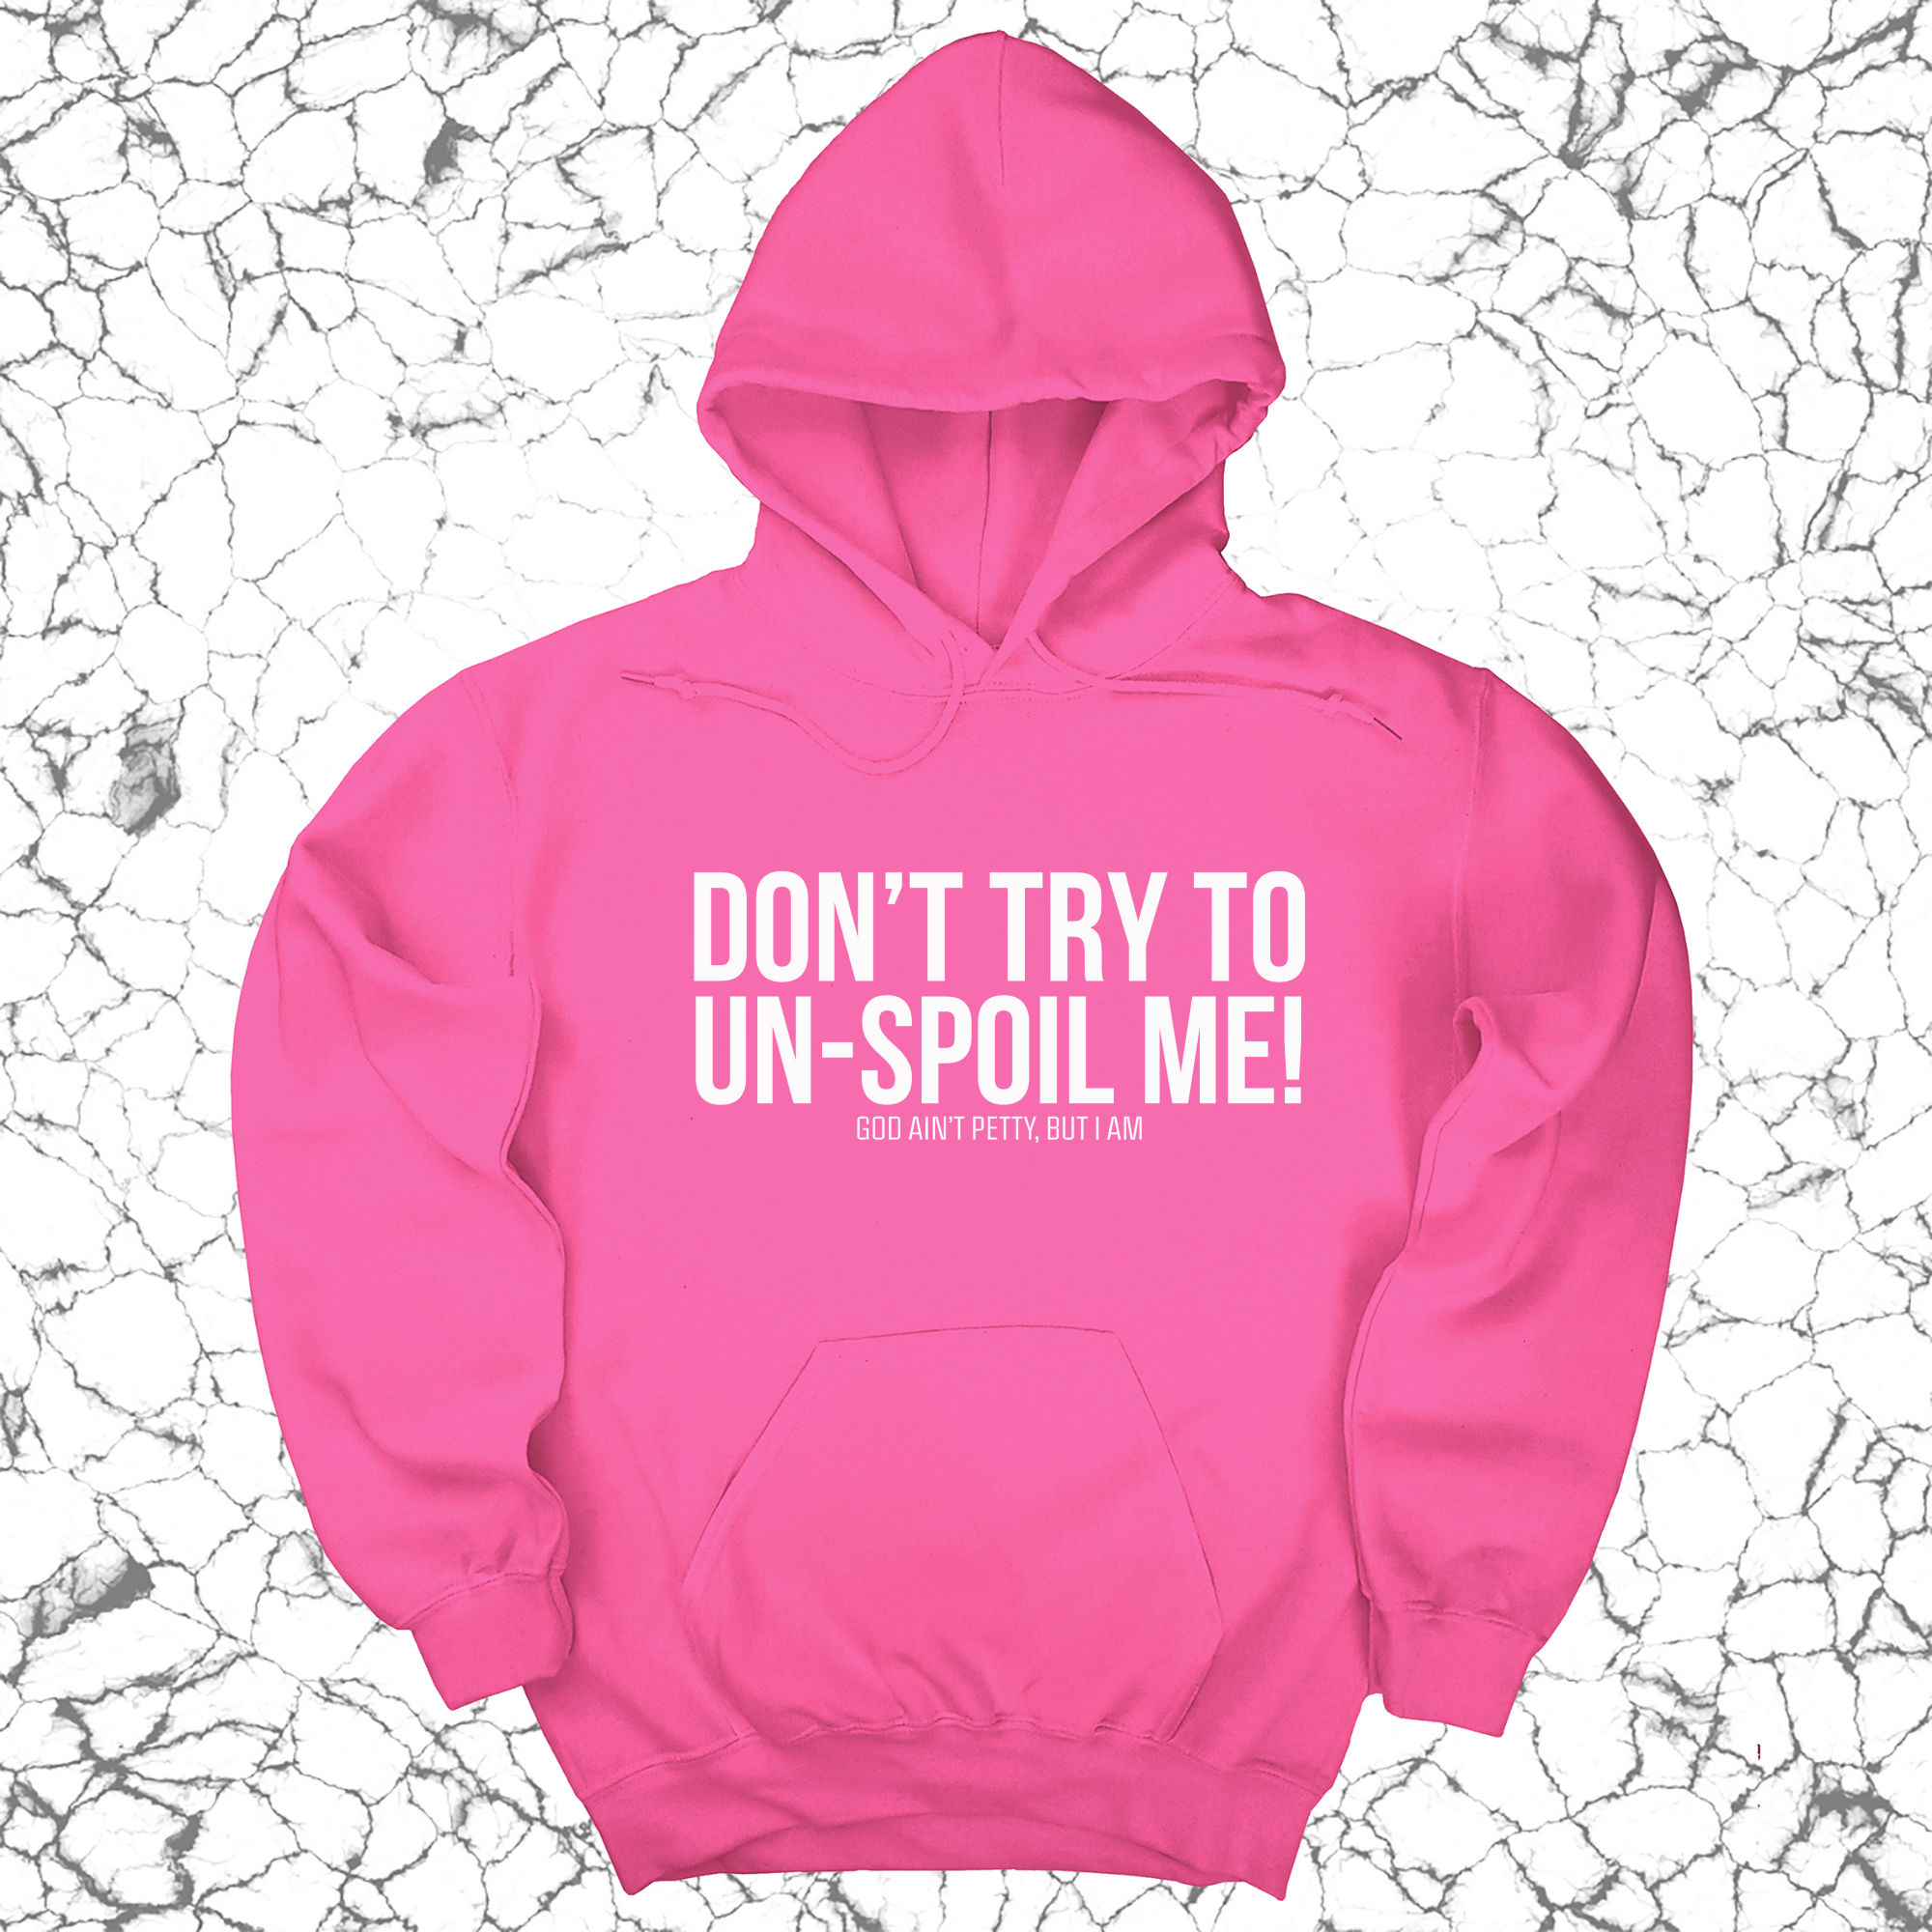 Don't try to un-spoil me Unisex Hoodie-Hoodie-The Original God Ain't Petty But I Am